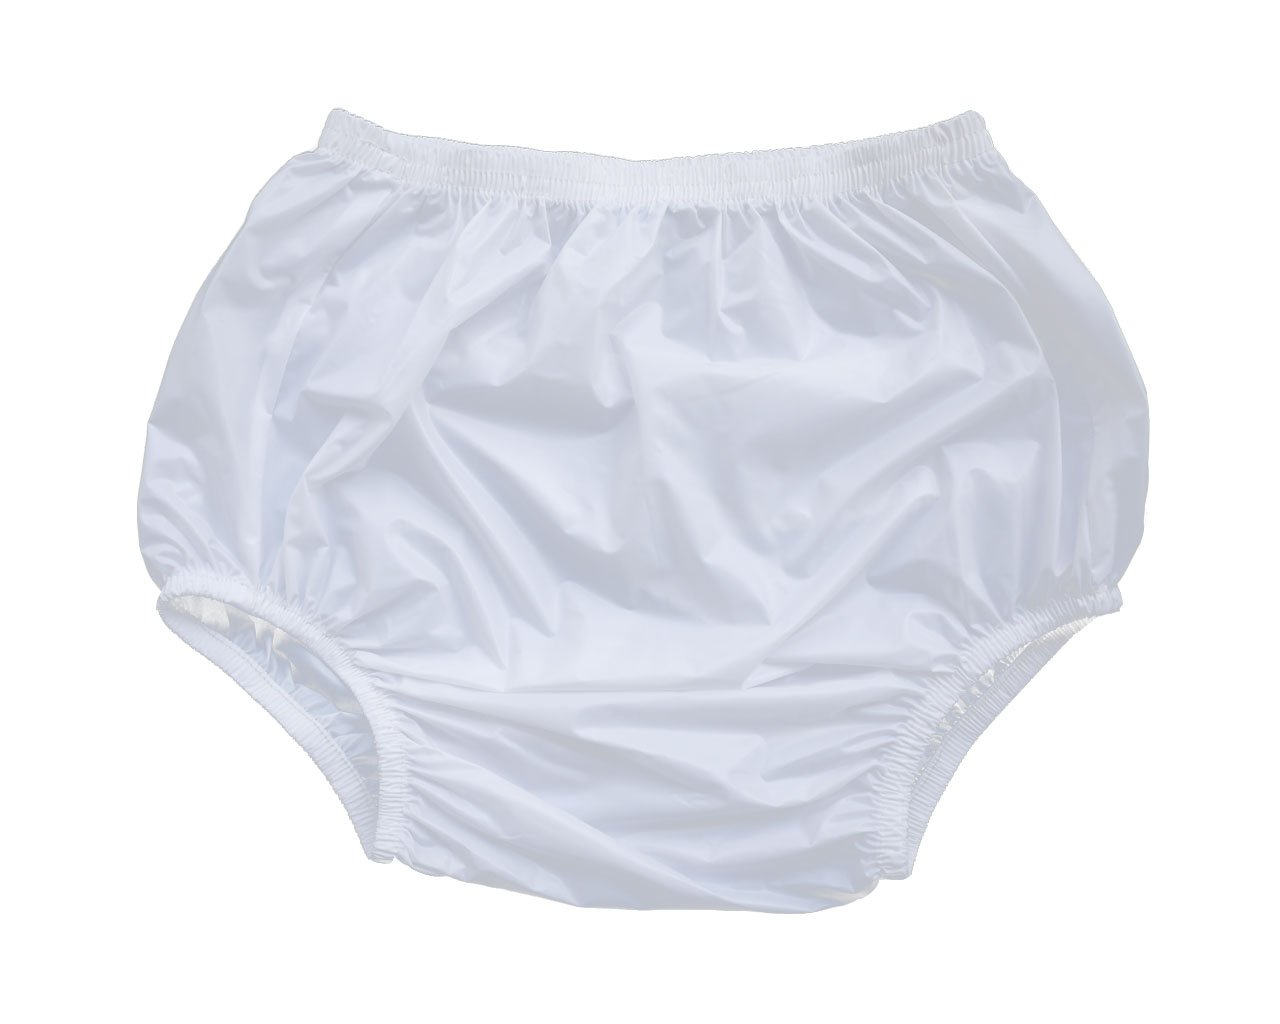 Haian Adult Frilly Plastic Rumba Incontinence Pull-on Plastic Pants with  White PVC Frilly (Medium, Baby Pink) : Amazon.co.uk: Health & Personal Care